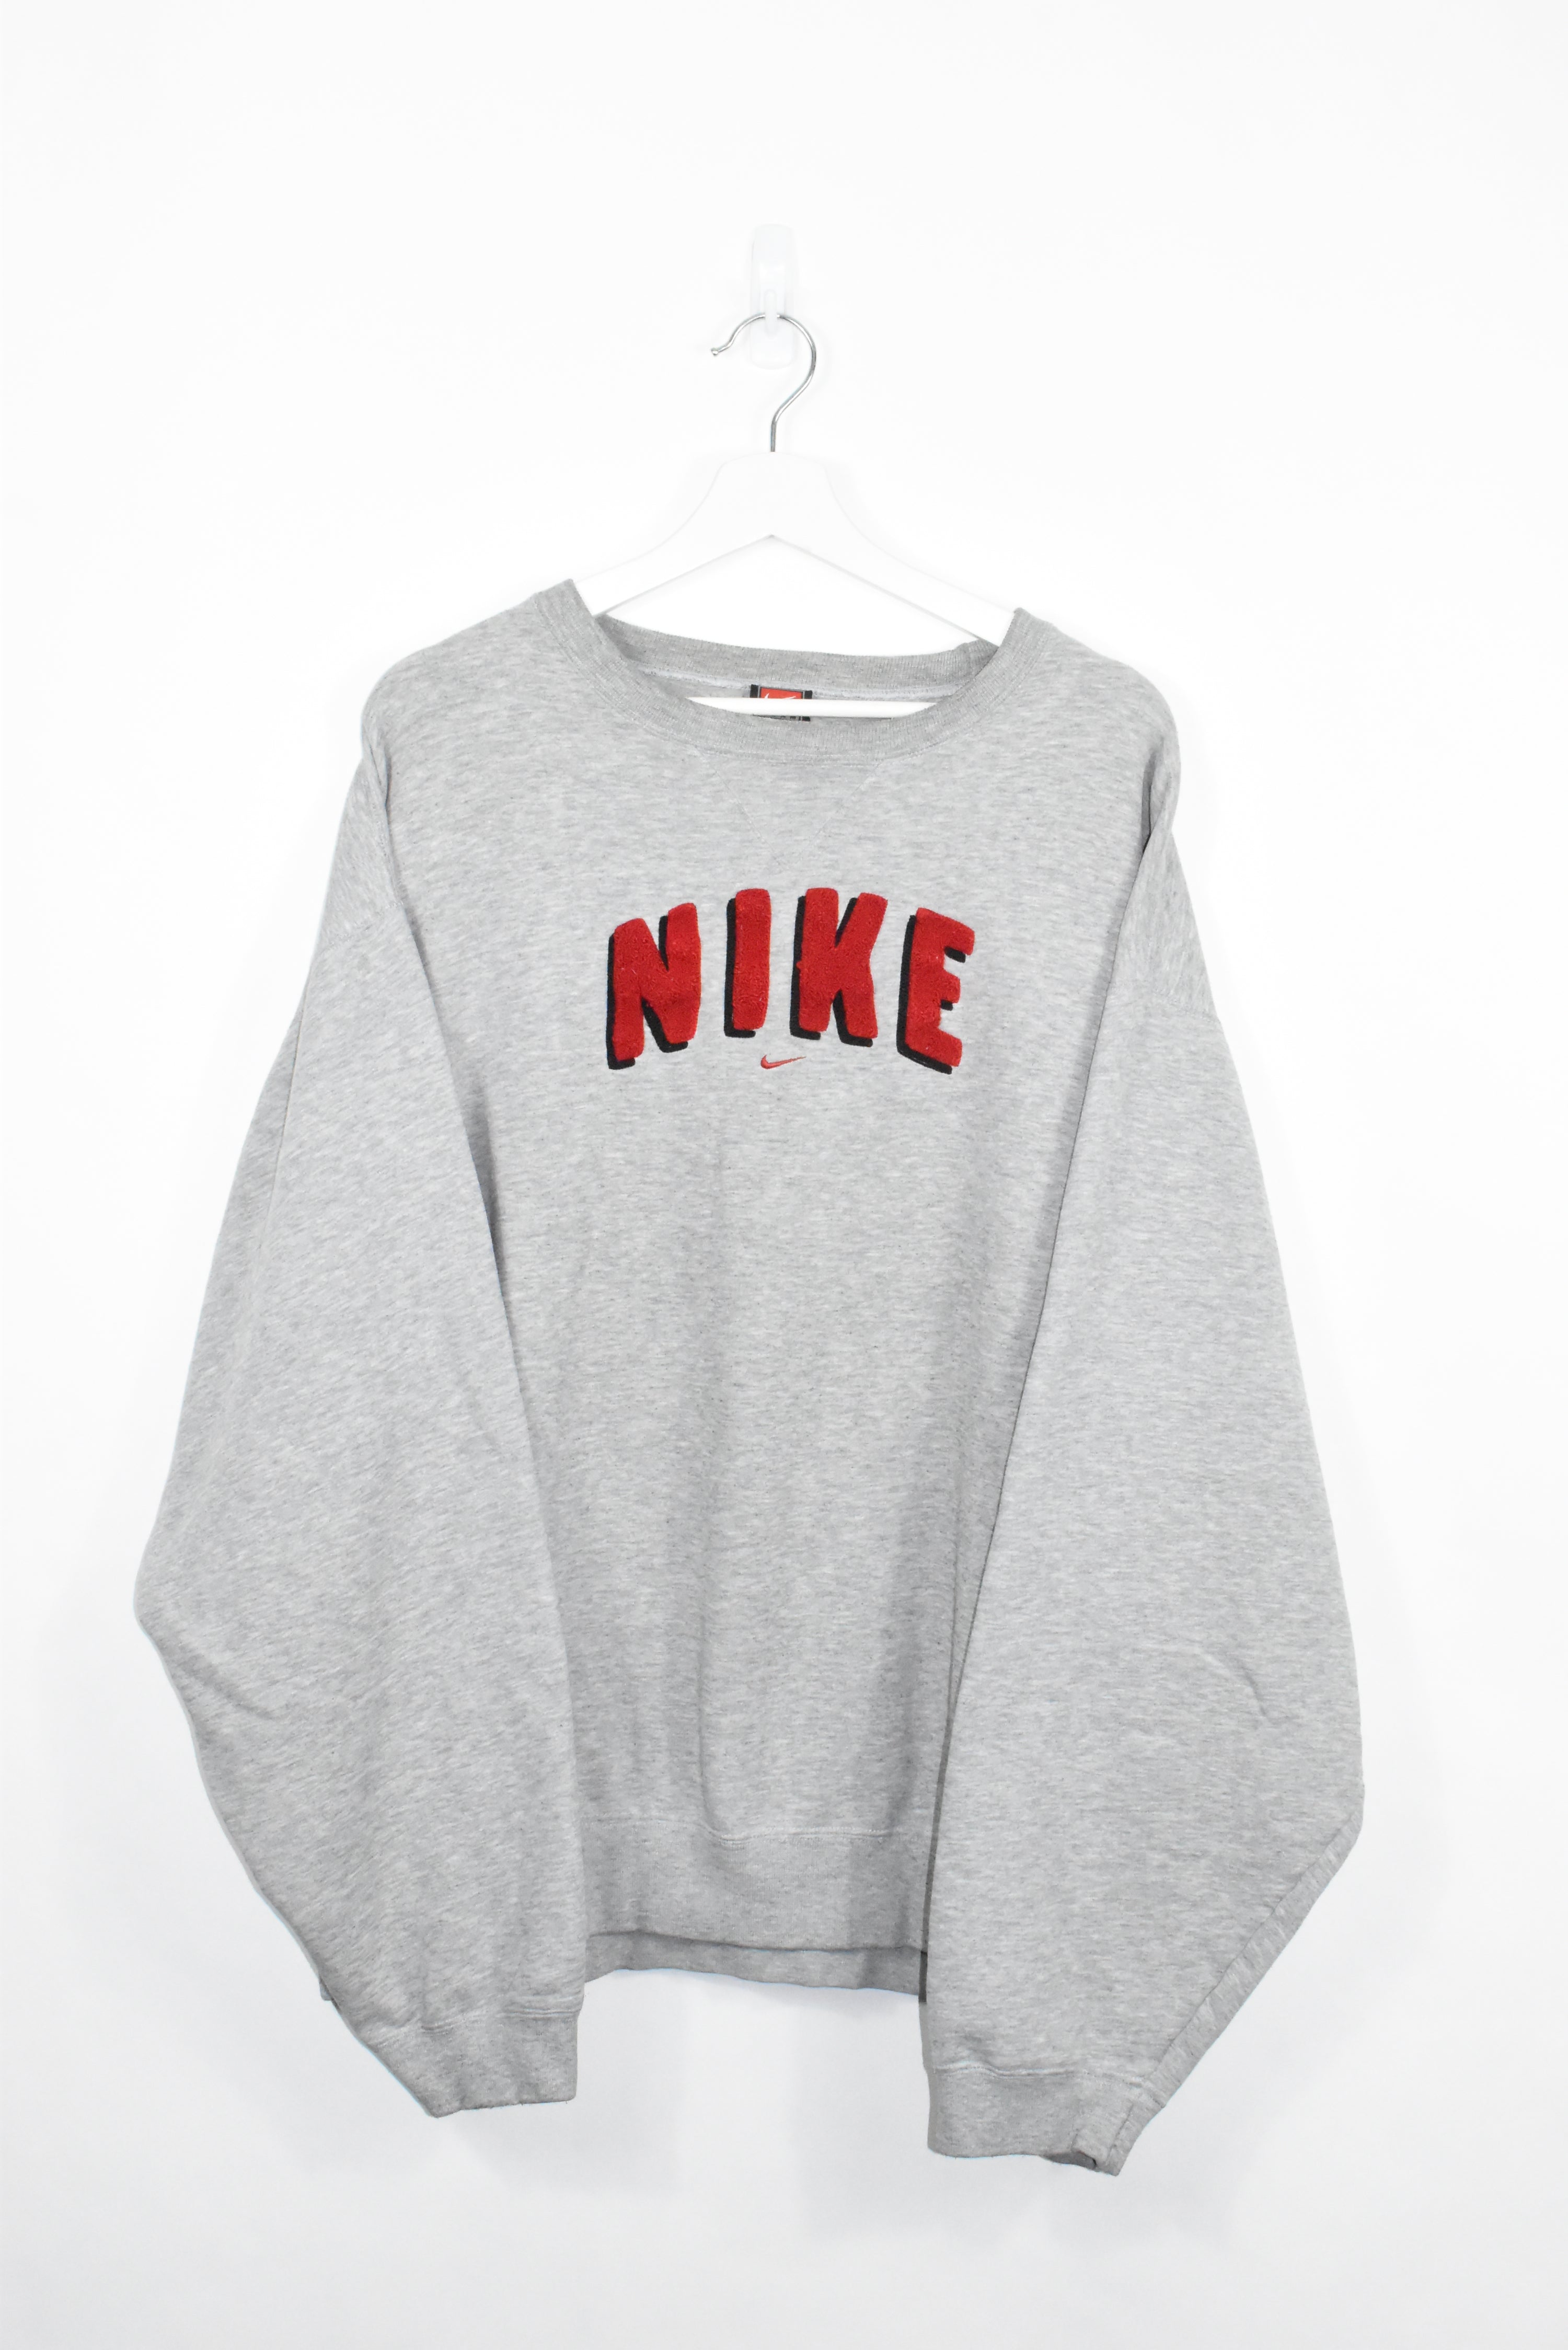 Vintage Nike Embroidered 3D Spellout Sweatshirt Xlarge